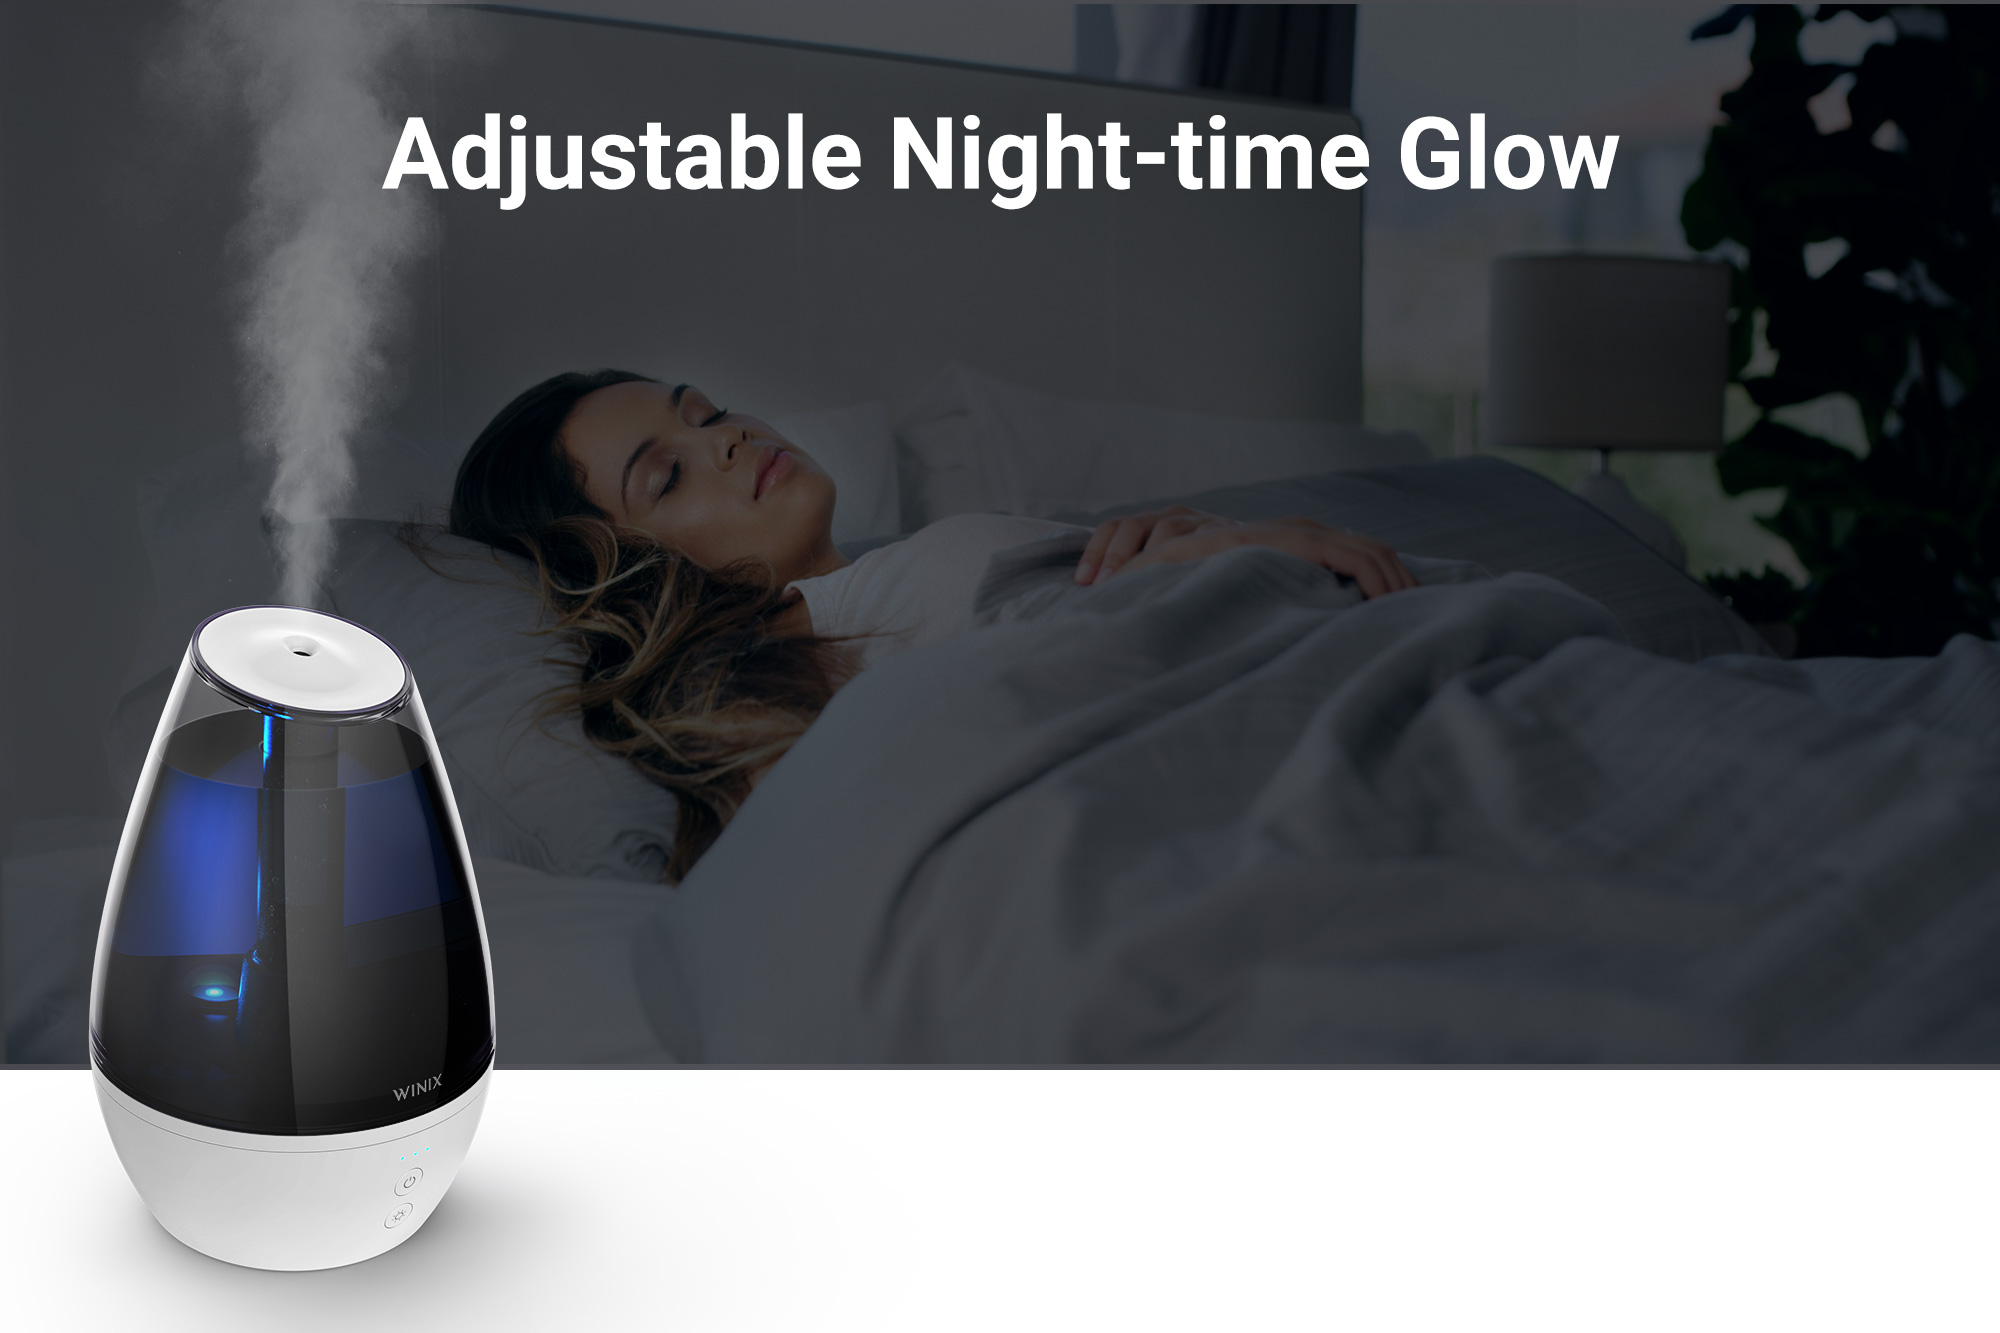 L100 humidifier next to sleeping woman and text saying adjustable night-time glow